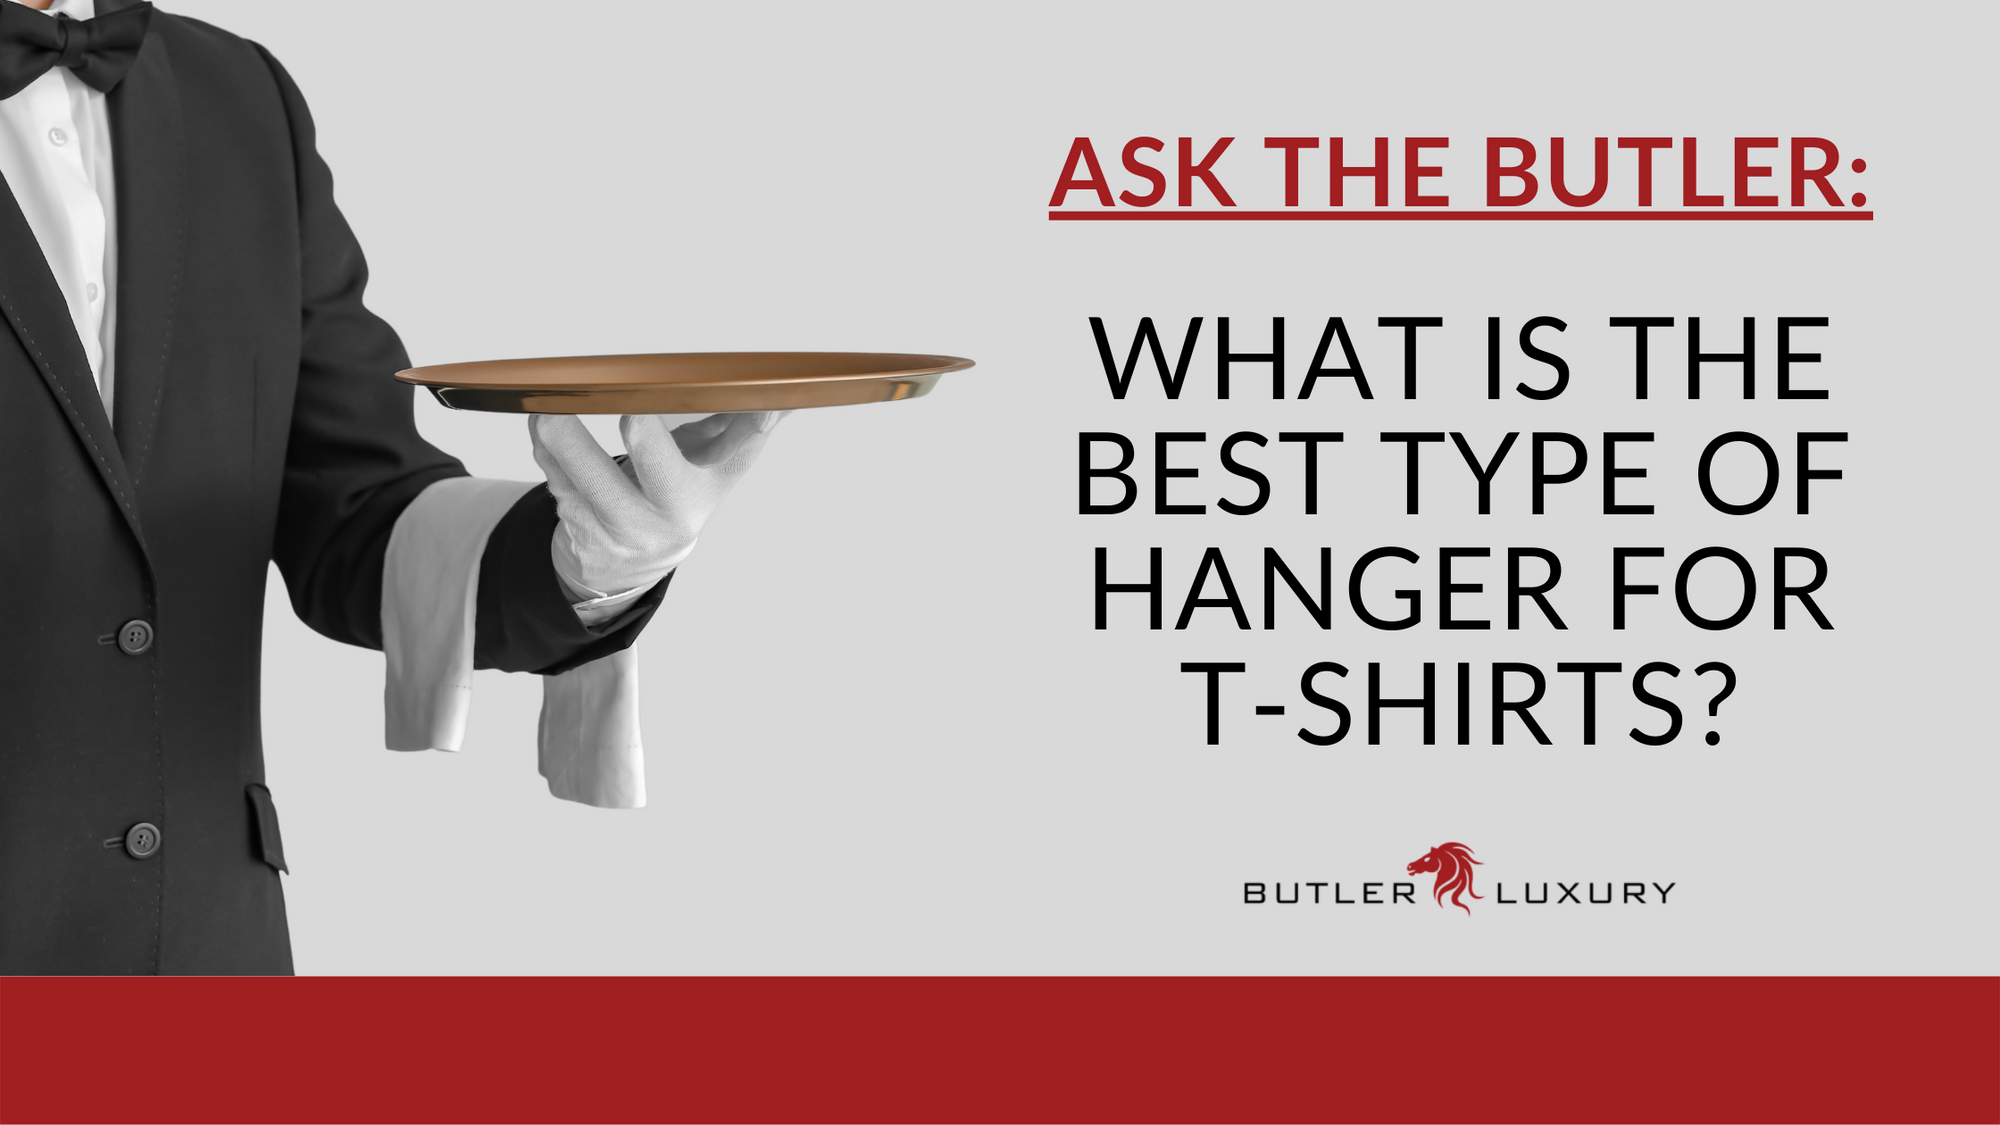 Ask the Butler: What is the Best Type of Hanger for T-Shirts?